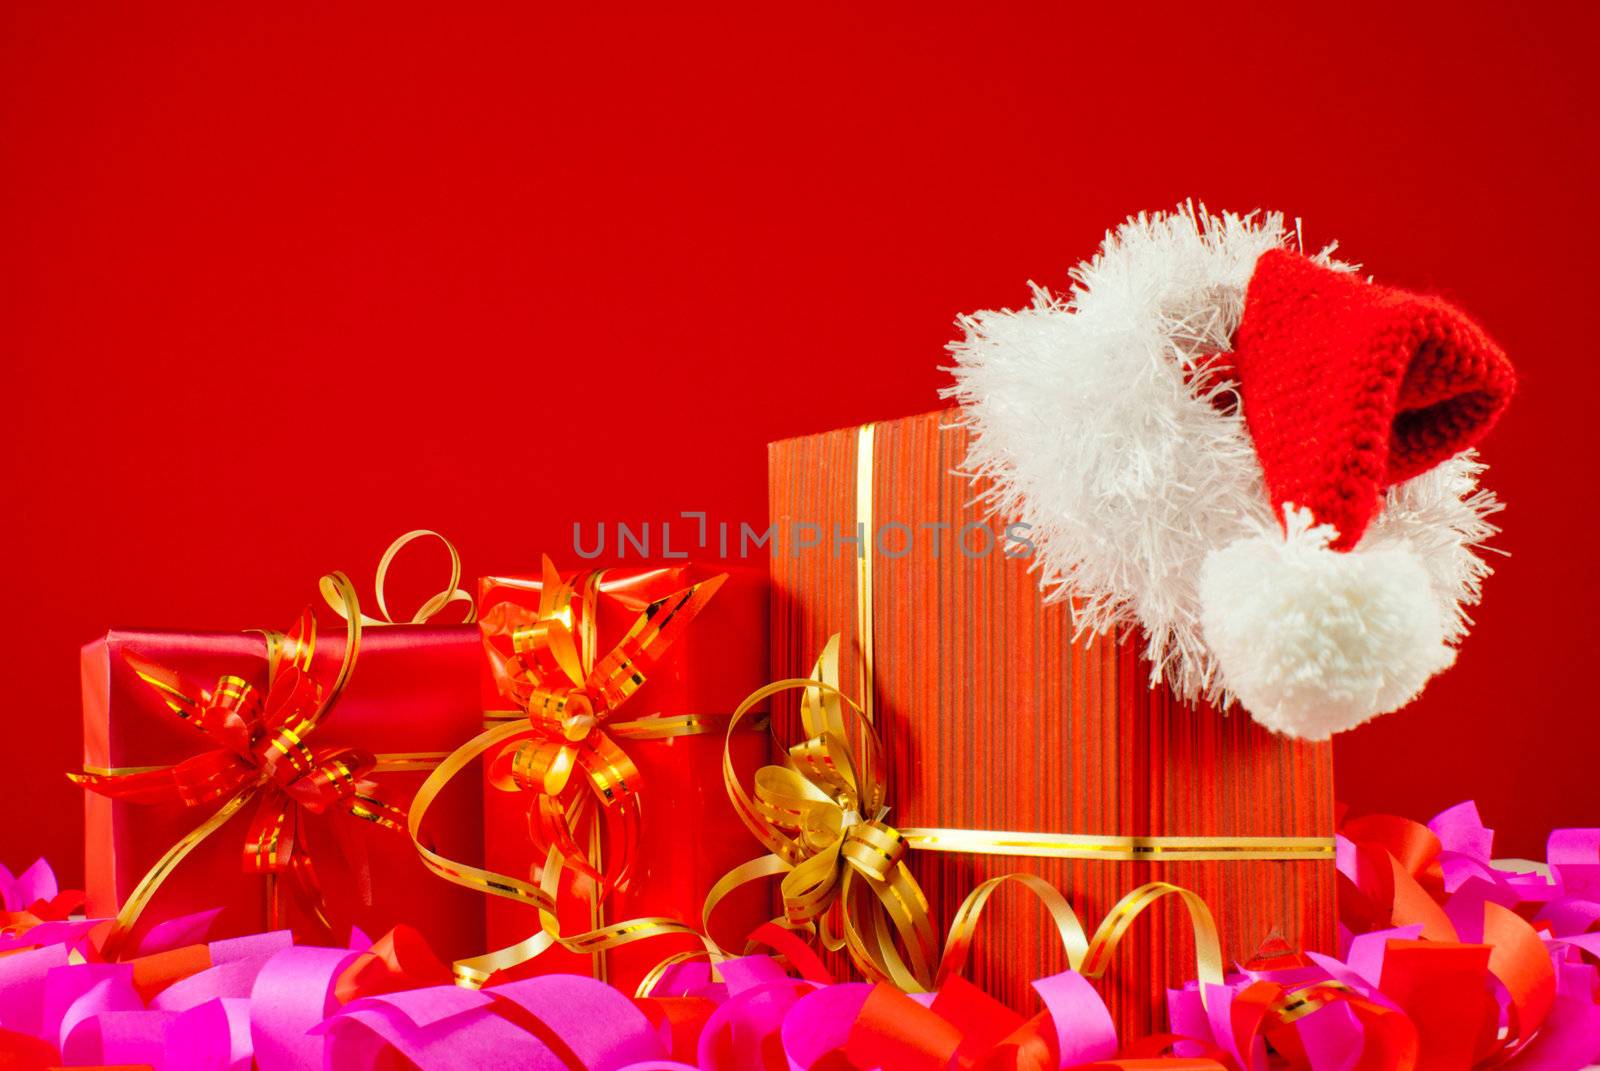 Christmas presents with Santa's hat against red background